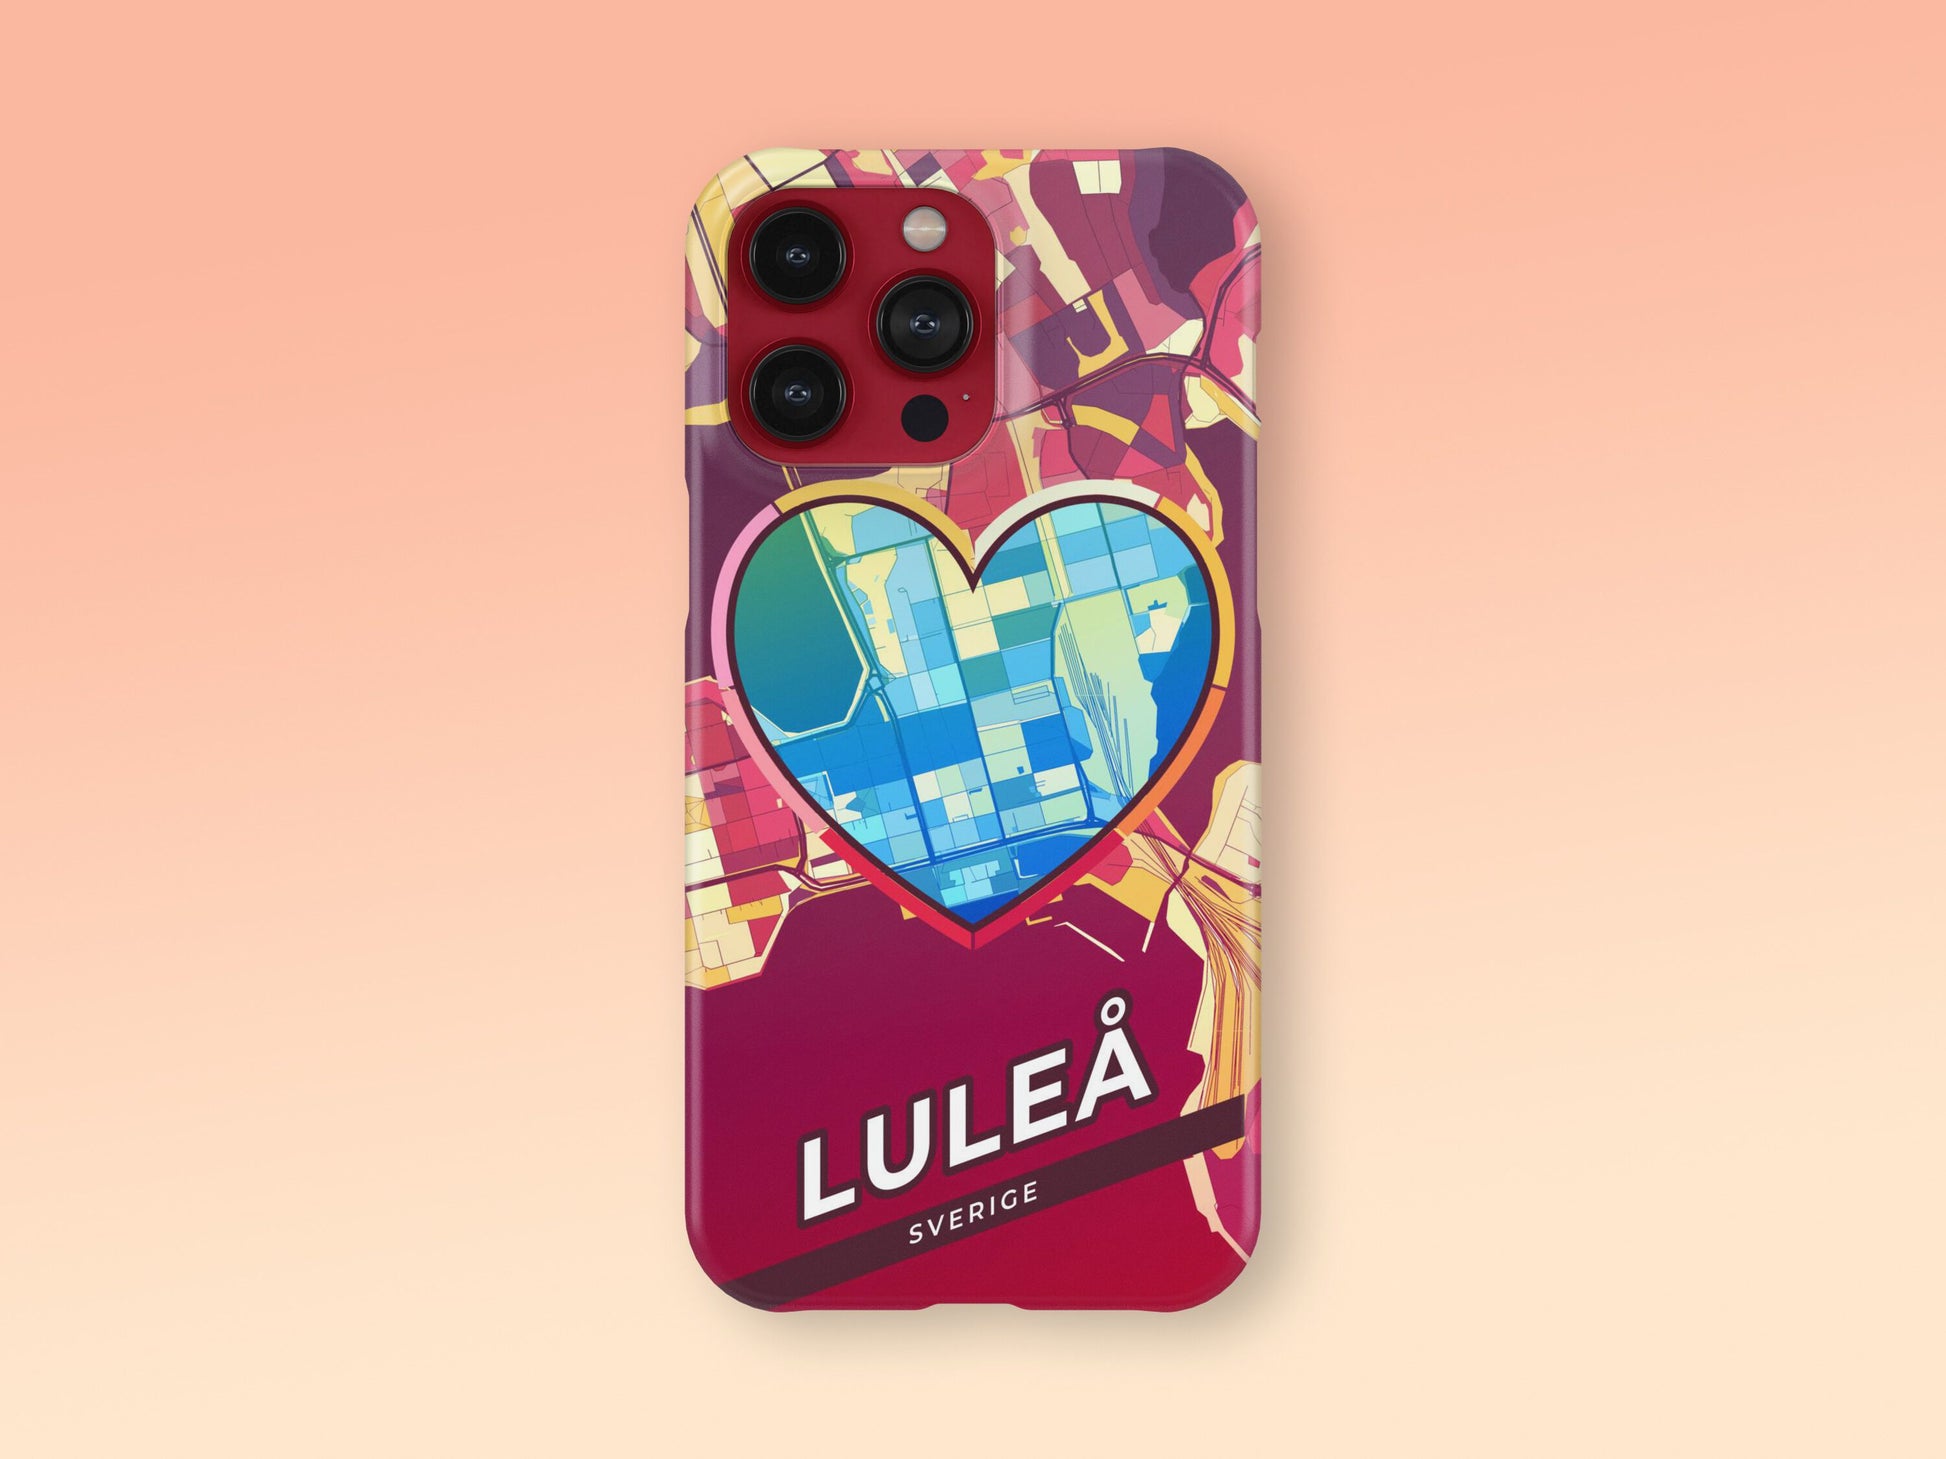 Luleå Sweden slim phone case with colorful icon. Birthday, wedding or housewarming gift. Couple match cases. 2